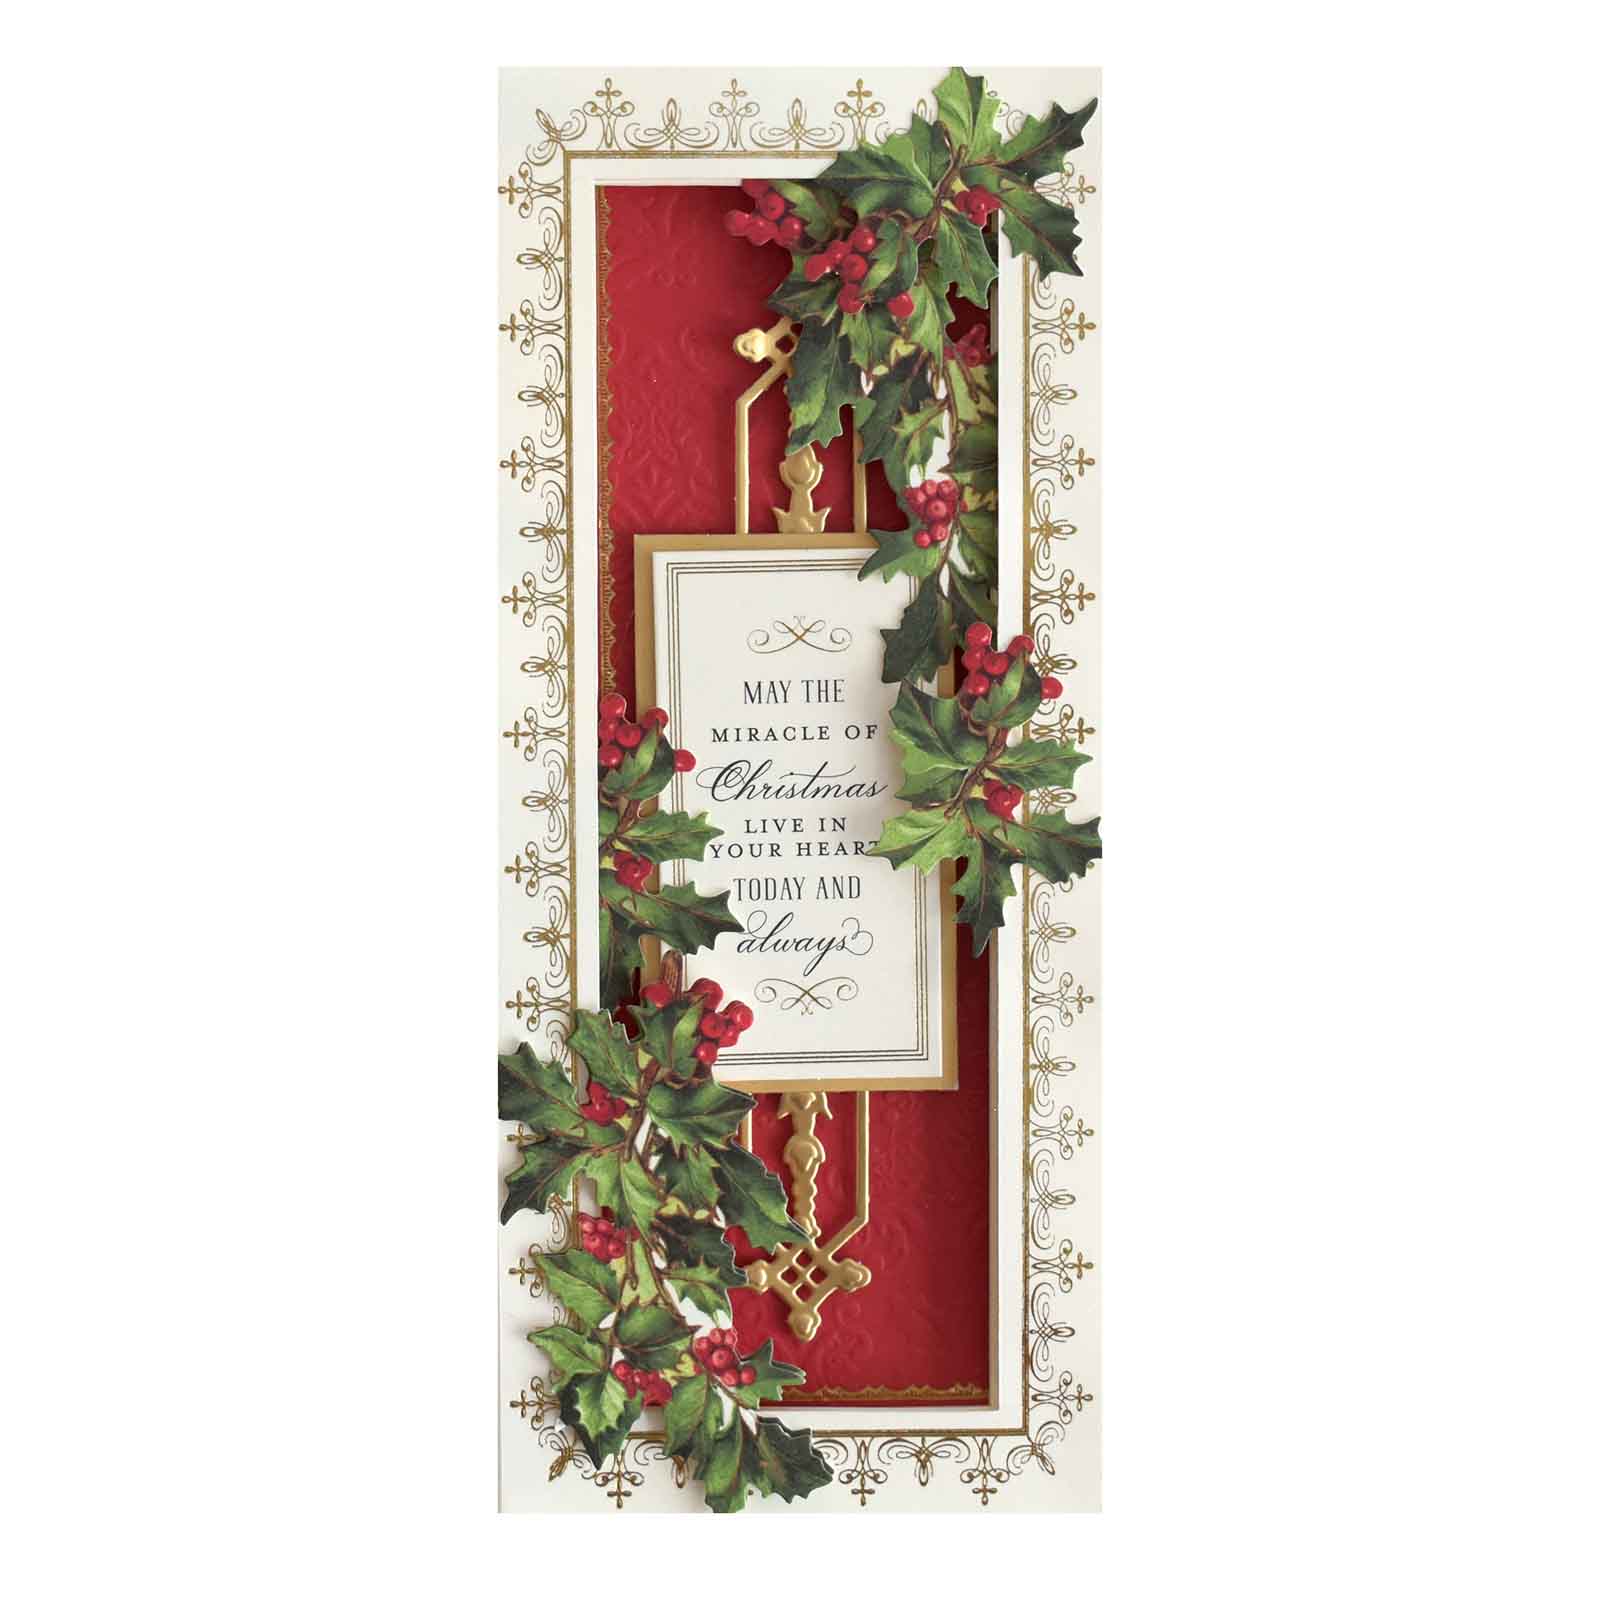 a christmas card with holly and holly leaves.